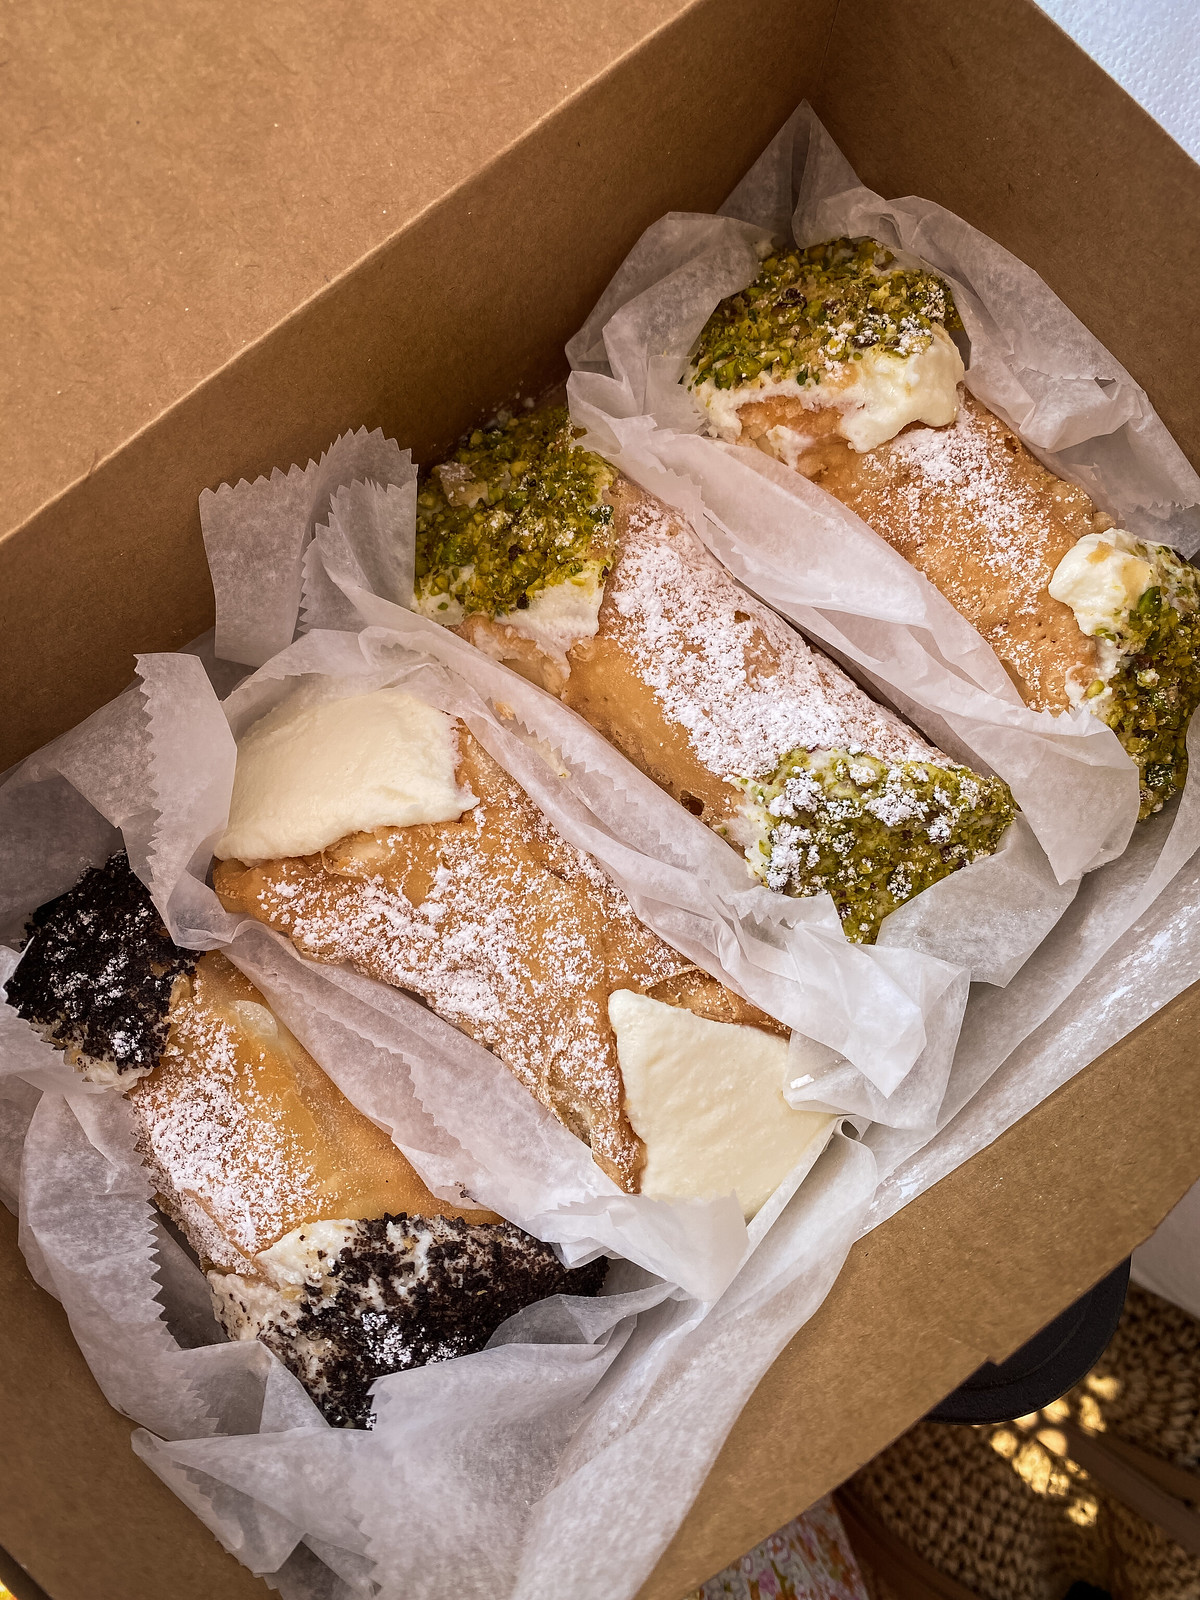 Mike's Pastry Cannolis in Boston's North End | What to Eat in Boston | New England Road Trip Itinerary - New England Road Trip - The Ultimate 7 Day Itinerary - The Perfect Summer New England Road Trip Itinerary